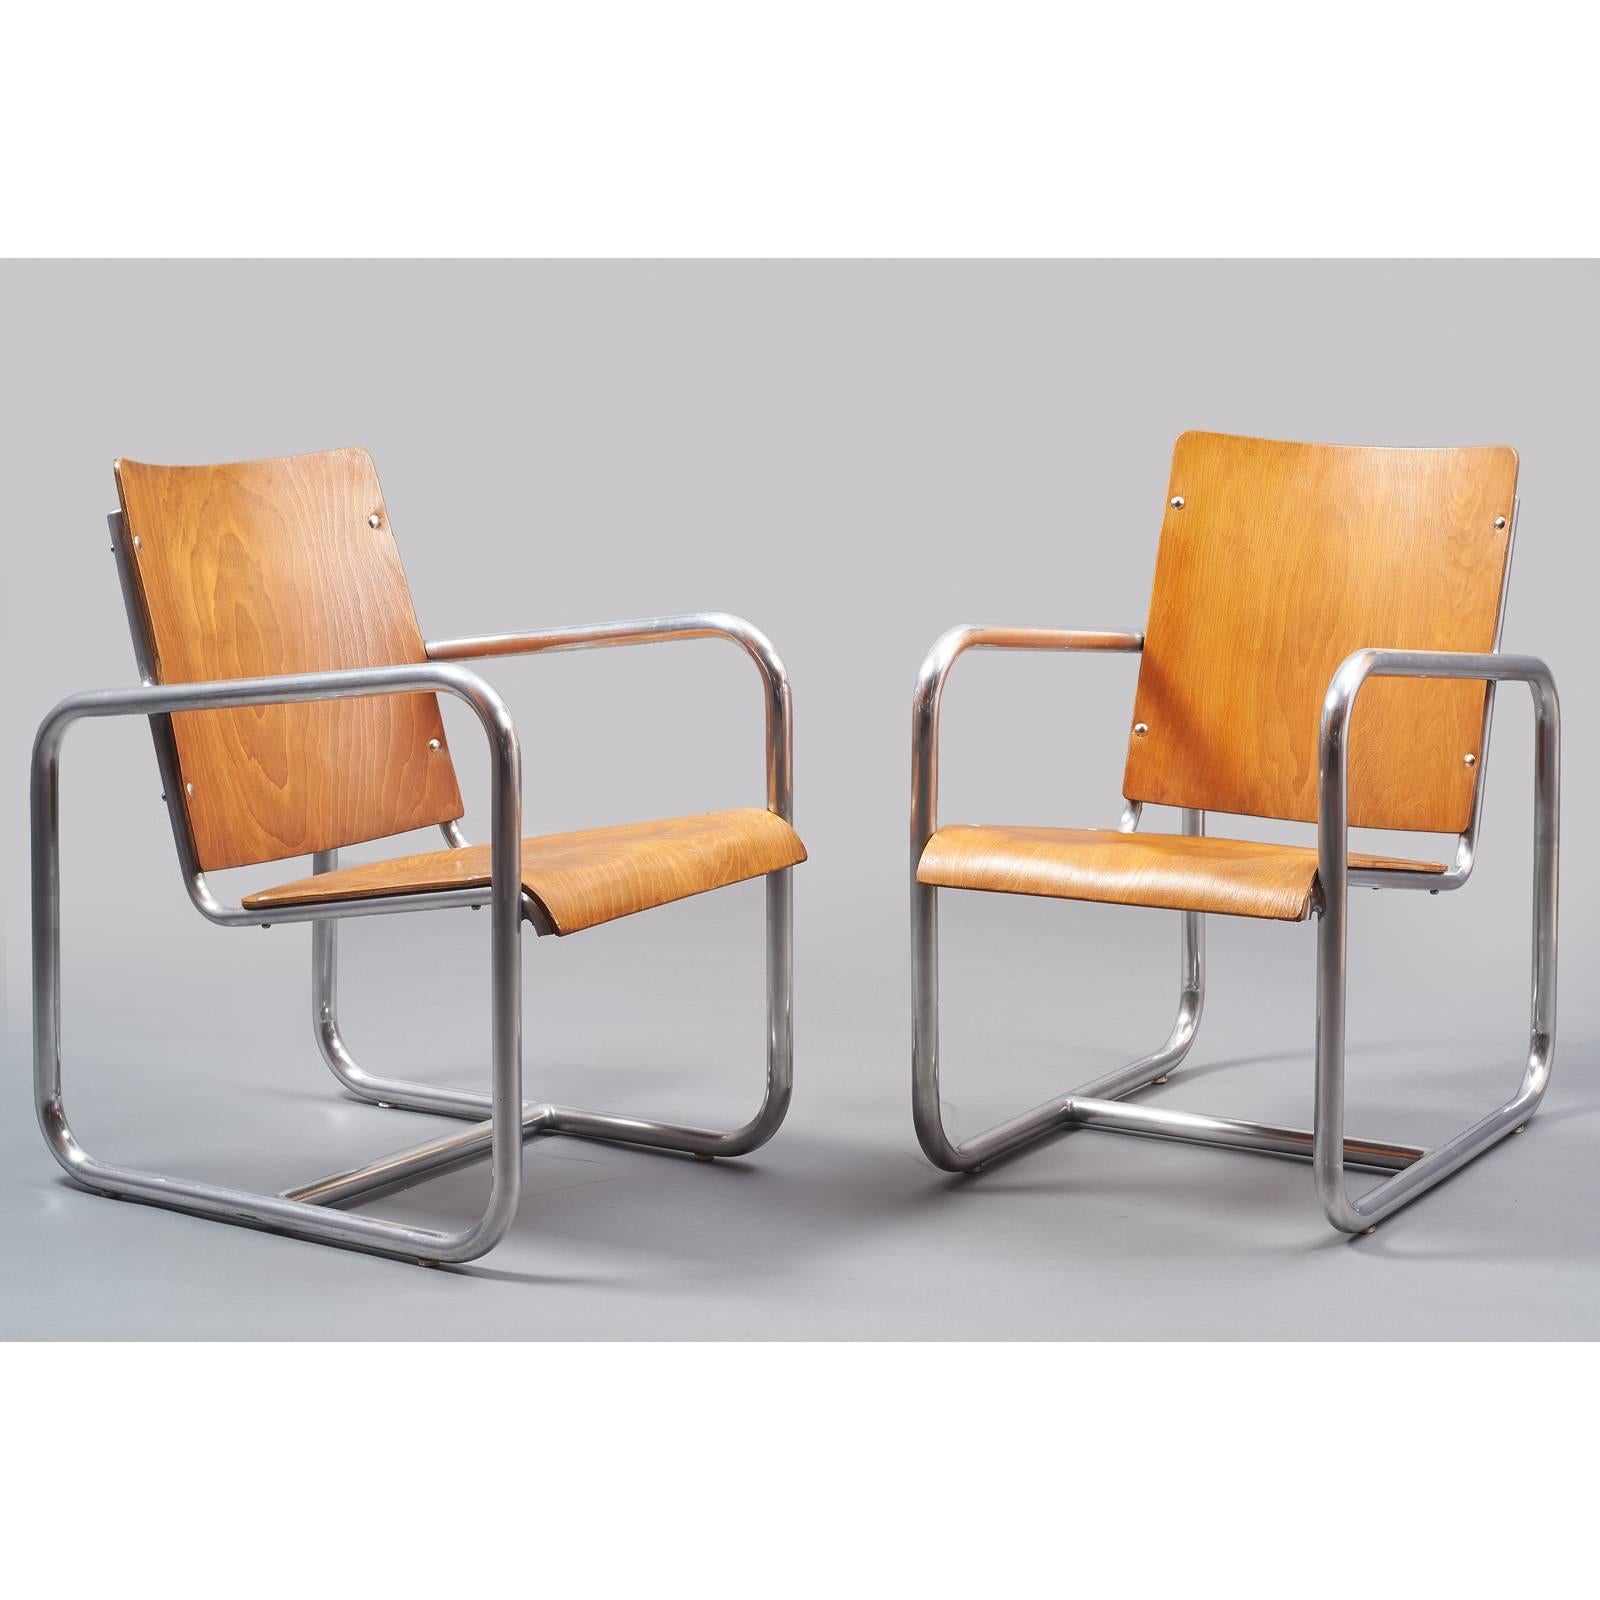 Italy, 1930s.
Early modernist pair of nickeled tubular armchairs
with shaped plywood seat and back.
Measures: 20 W x 27 D x 16/31 H.